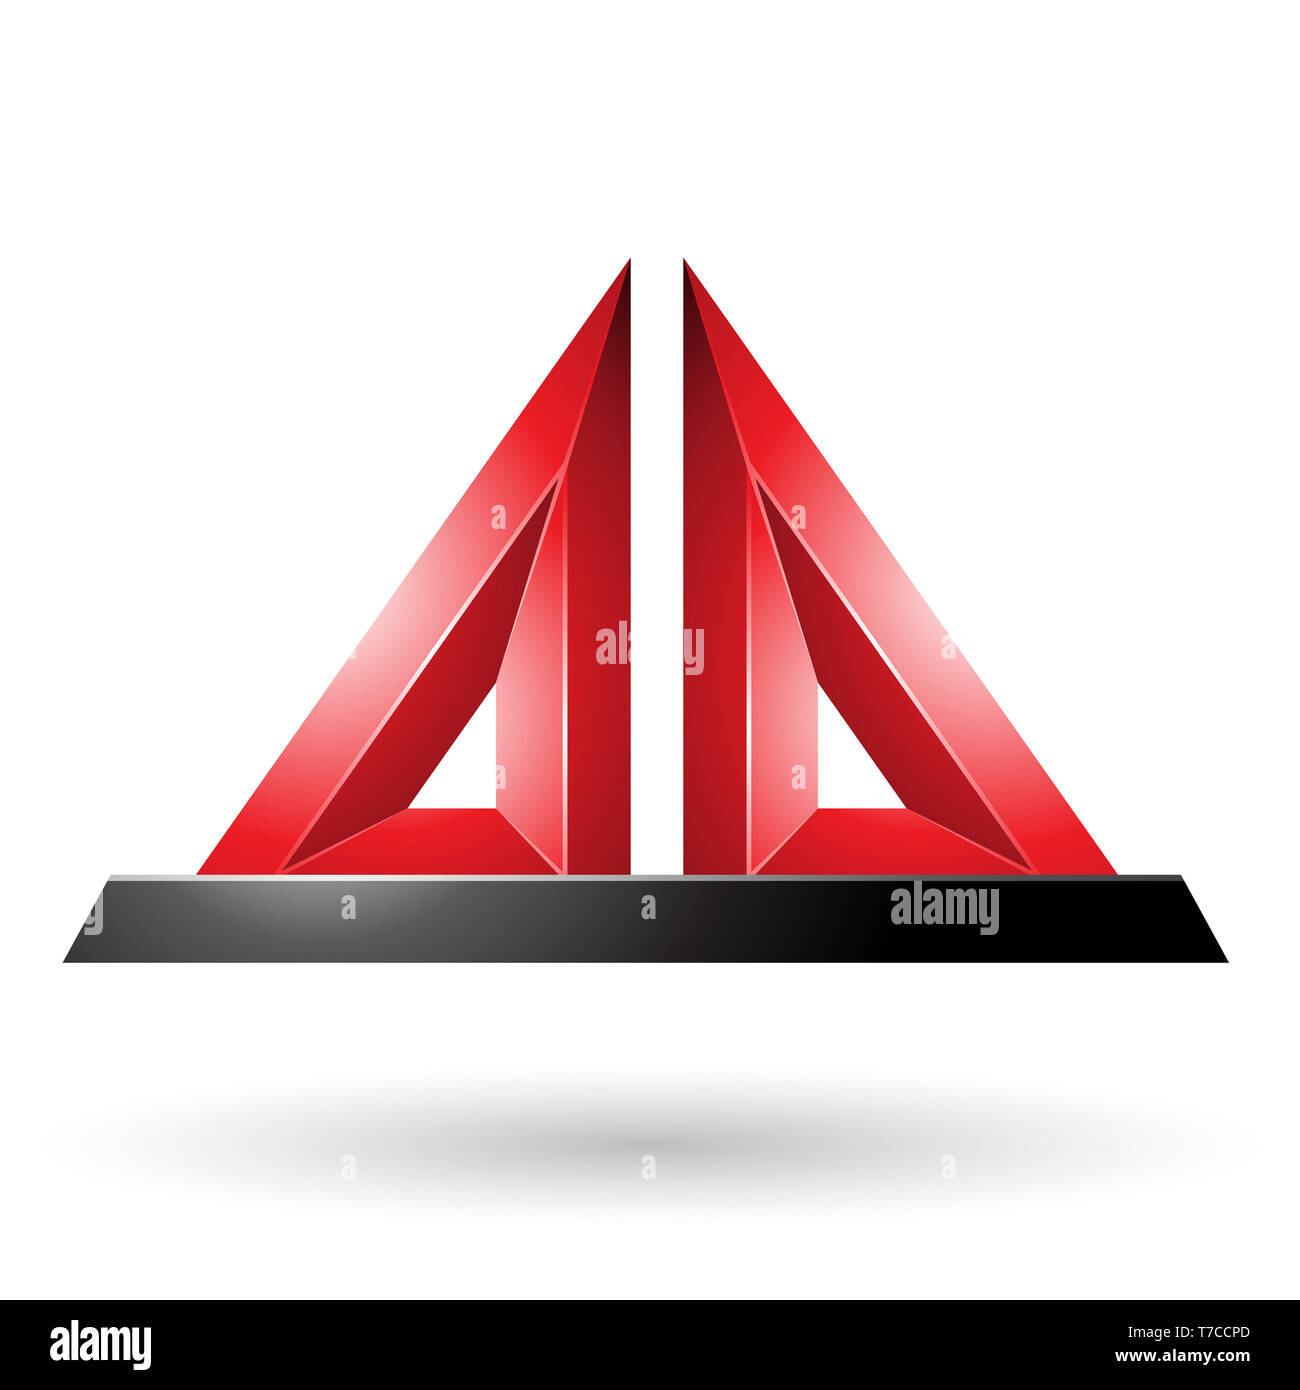 Vector Illustration of Red 3d Pyramidical Embossed Shape isolated on a White Background Stock Photo